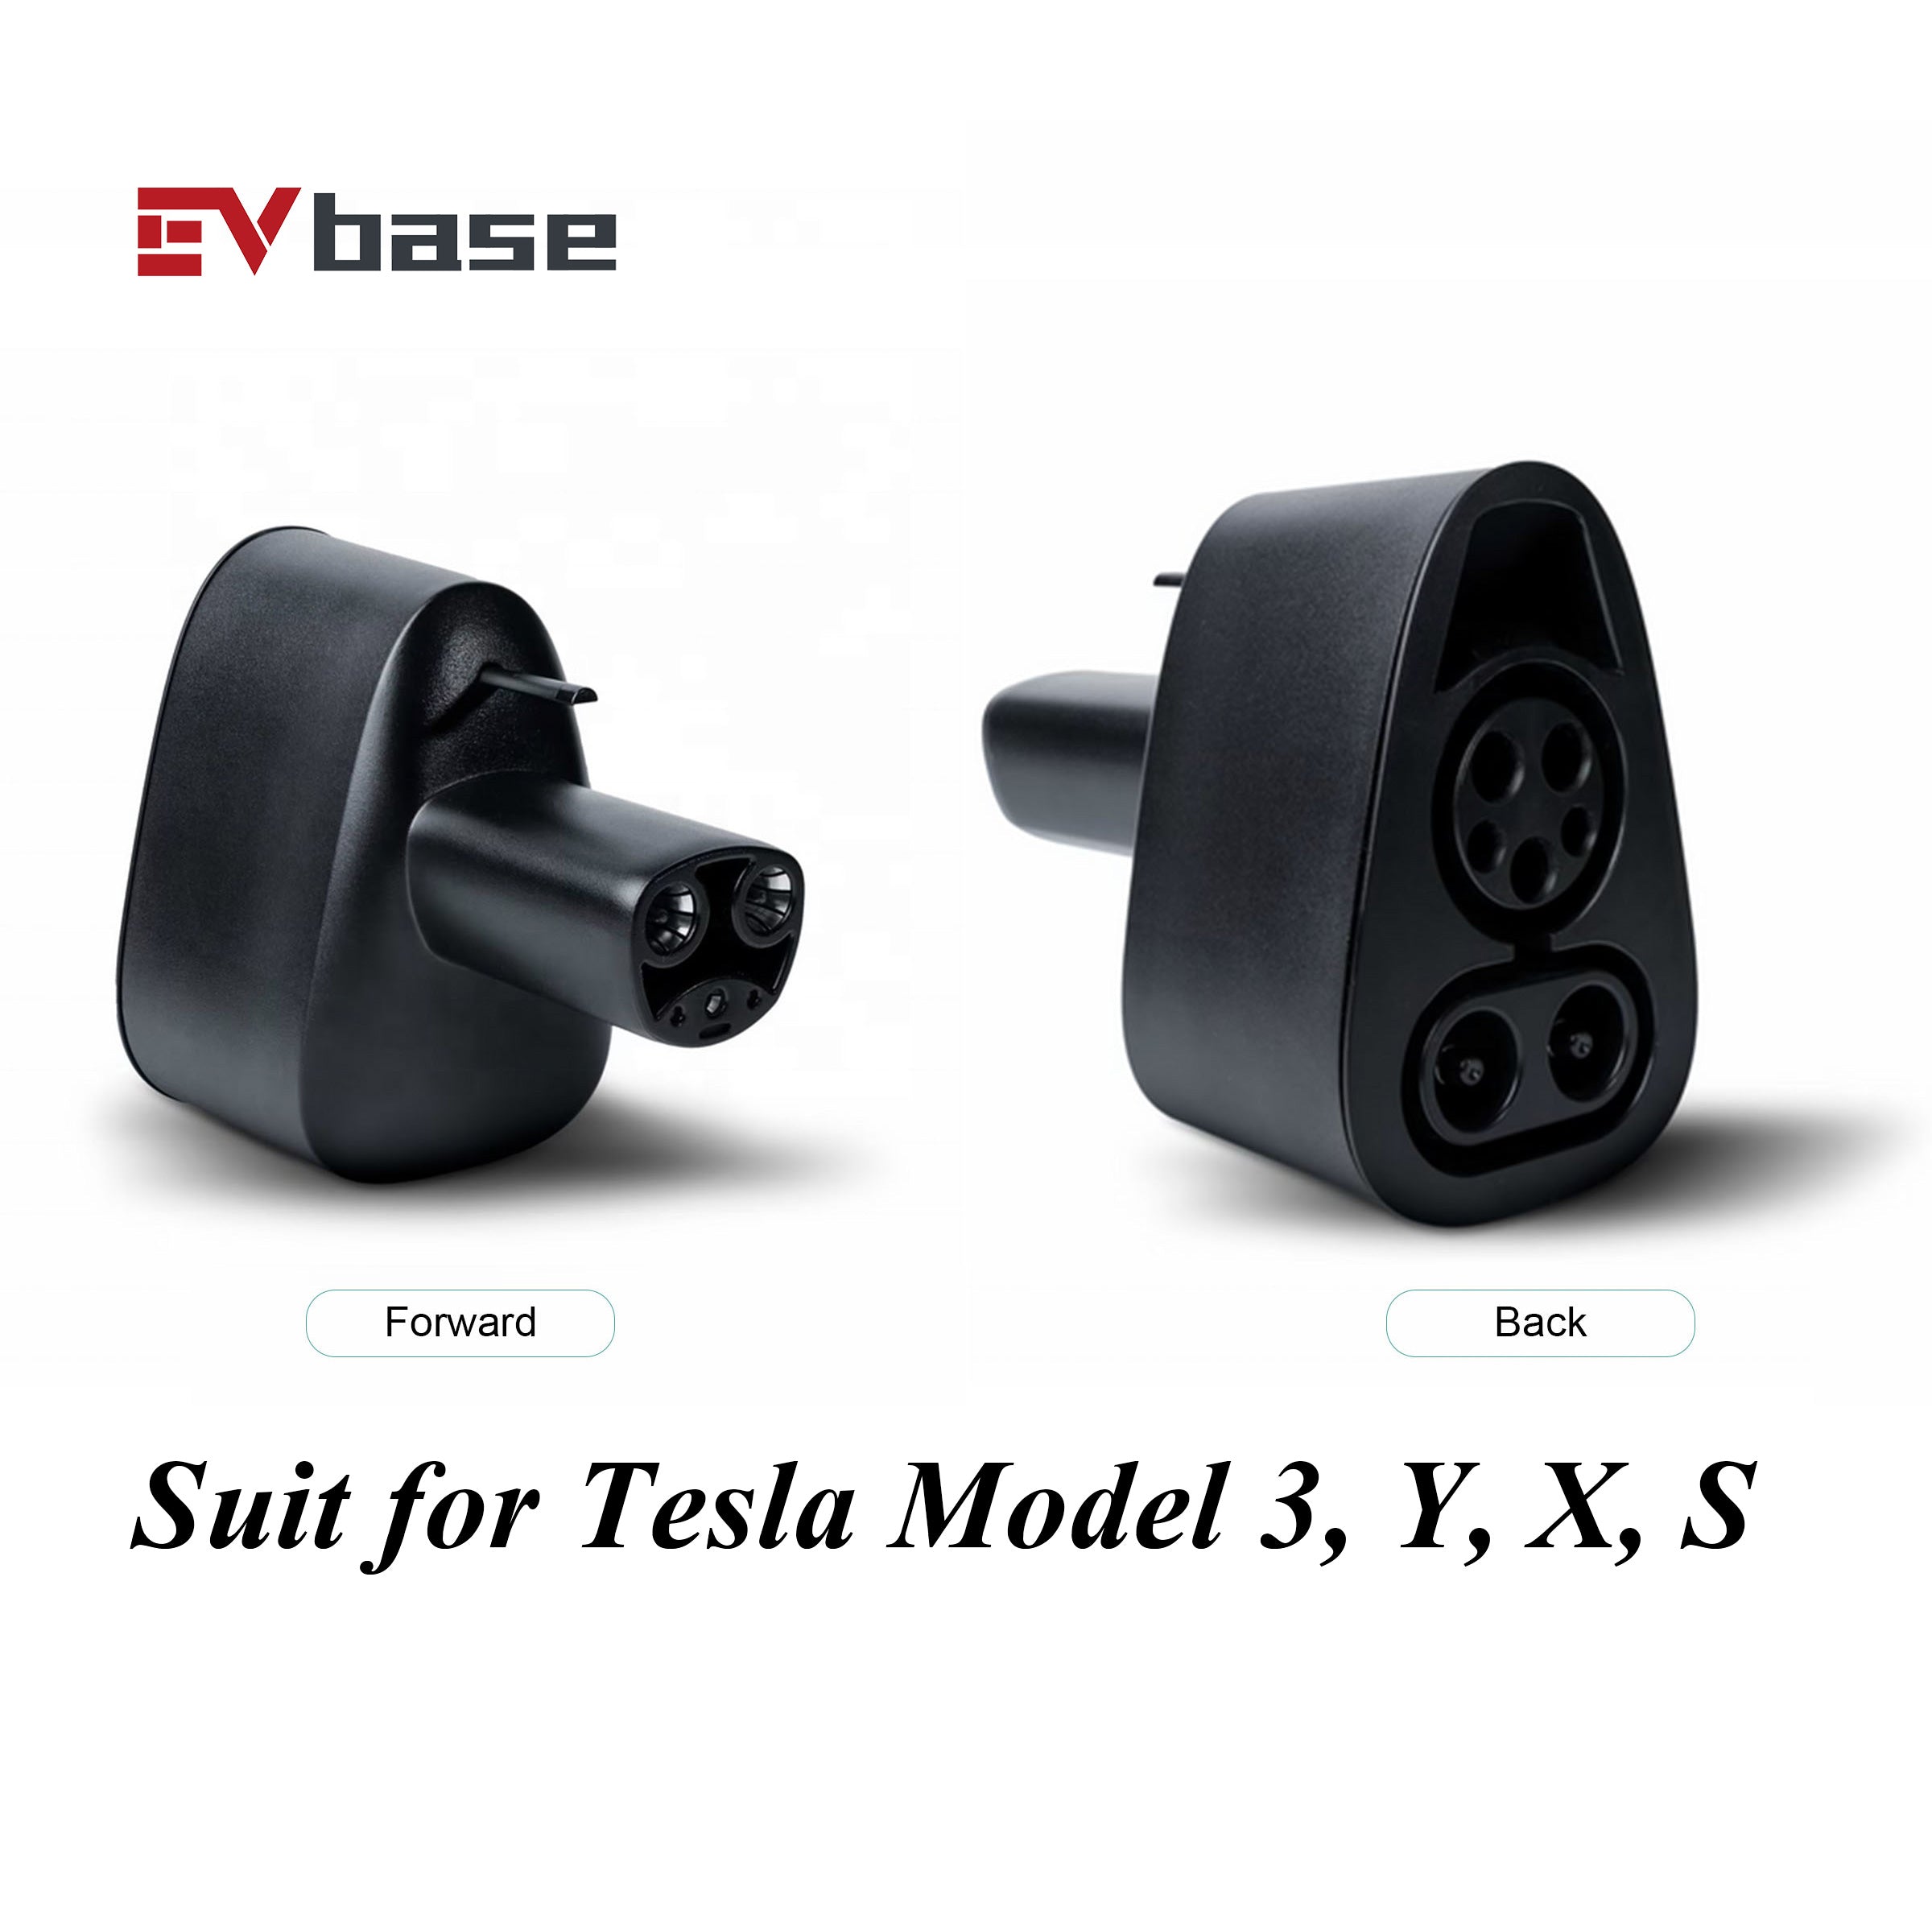 MICTUNING CCS Charger Adapter Compatible with Tesla Model 3,Y, S and X -  for Tesla Owners Only - 250KW DC Fast Charging Black Applicable to All CCS1  Chargers 